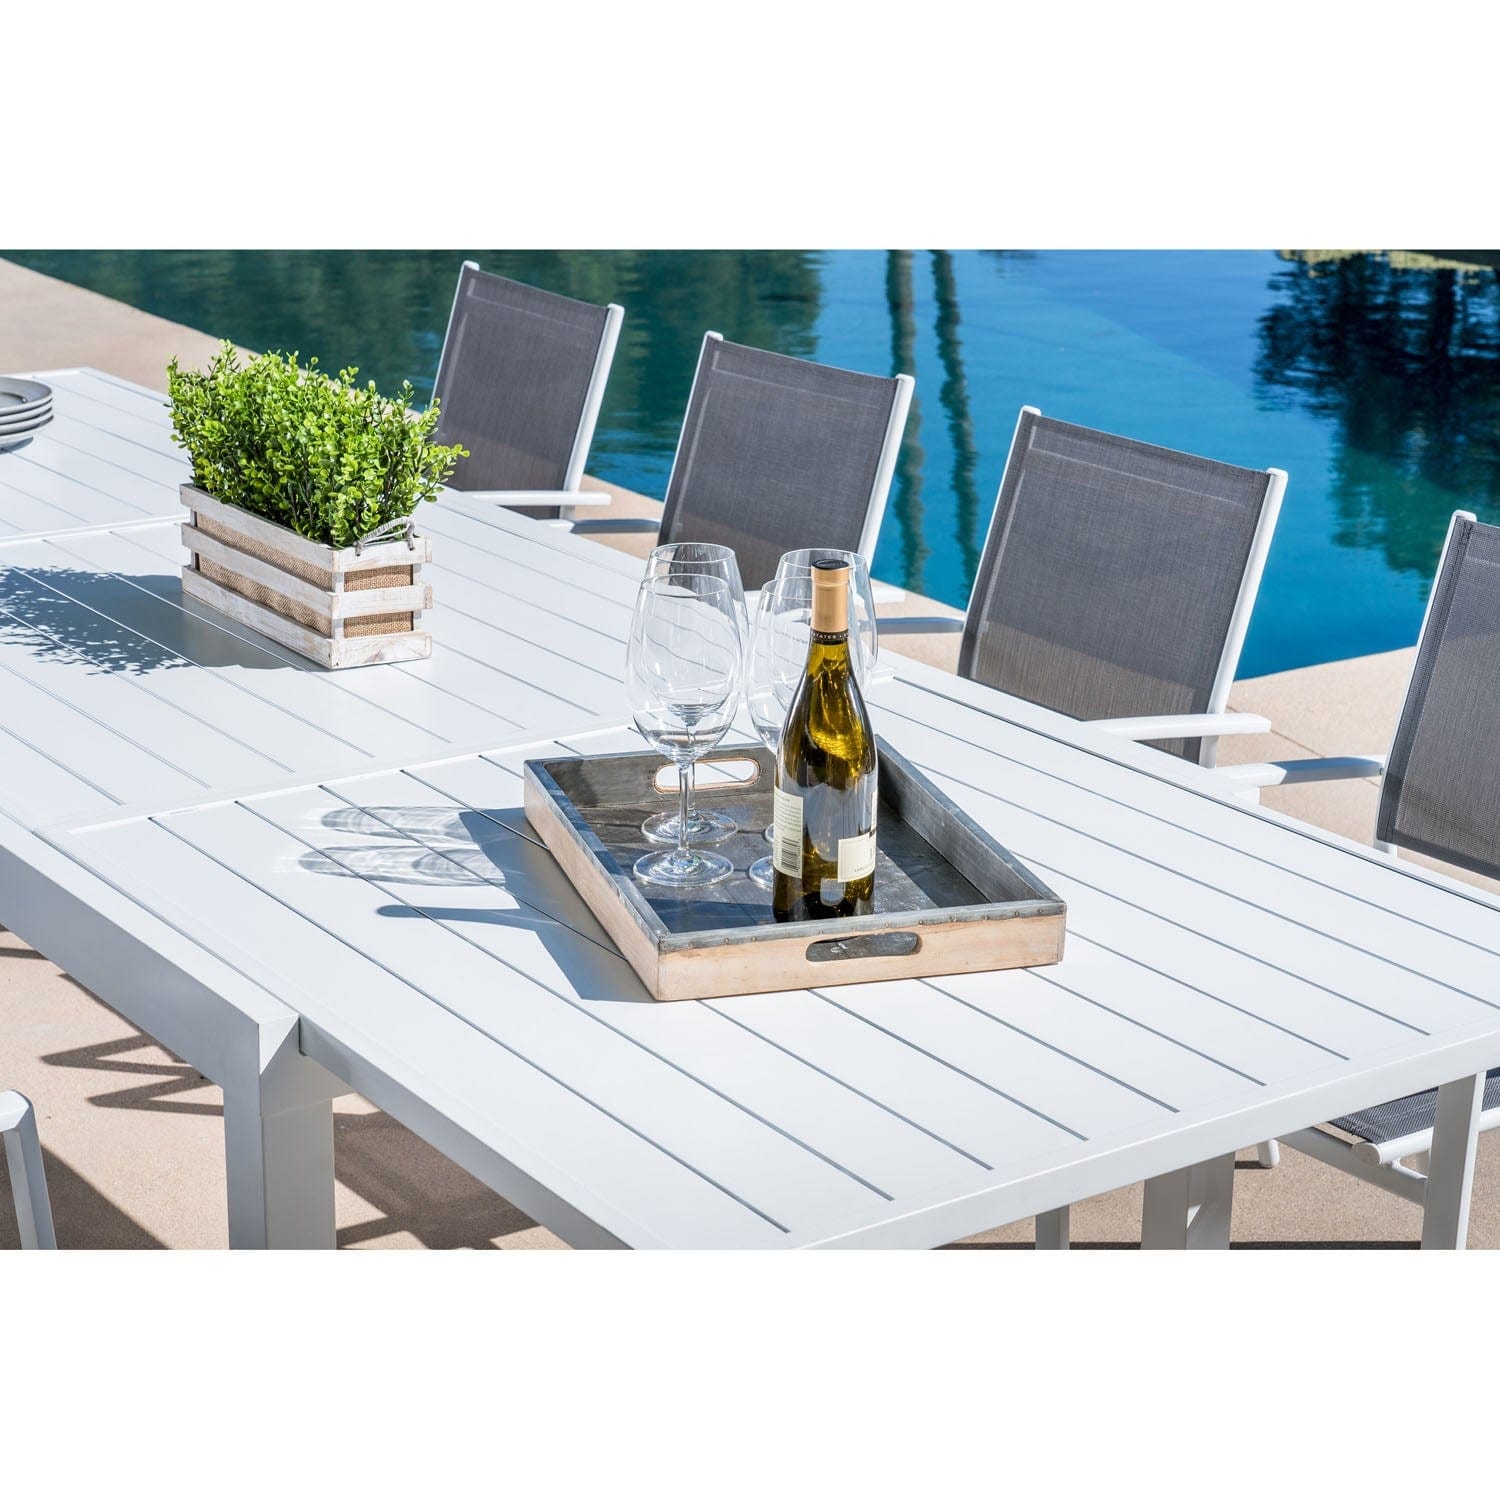 Hanover Outdoor Dining Set Hanover Del Mar 9 Piece Outdoor Dining Set with 8 Sling Chairs in Gray/White and a 40" x 118" Expandable Dining Table | DELDN9PC-WW